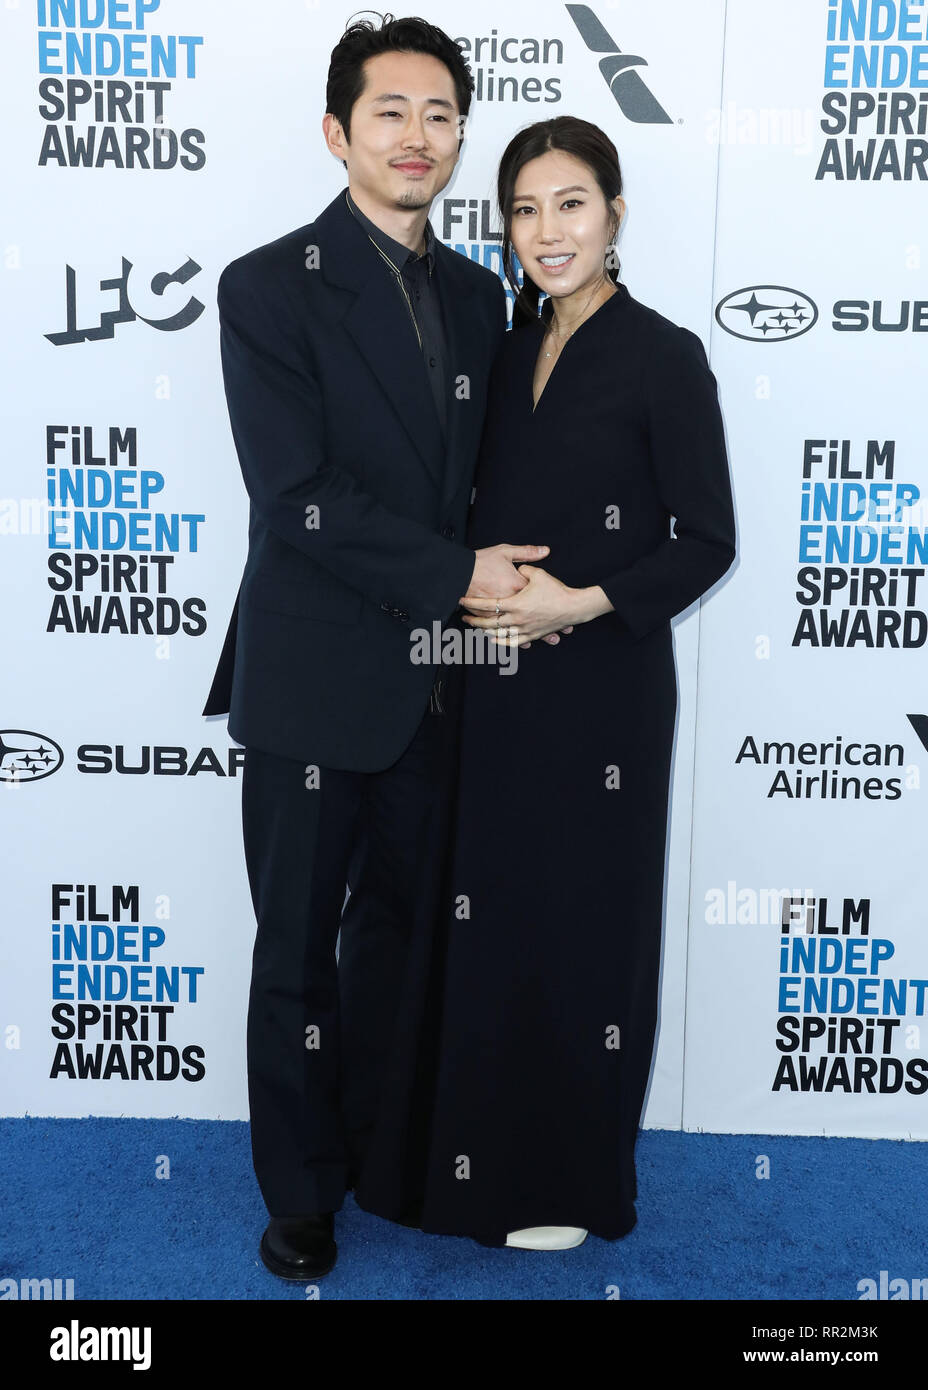 SANTA MONICA, LOS ANGELES, CA, USA - FEBRUARY 23: Actor Steven Yeun and  pregnant wife Joana Pak arrive at the 2019 Film Independent Spirit Awards  held at the Santa Monica Beach on